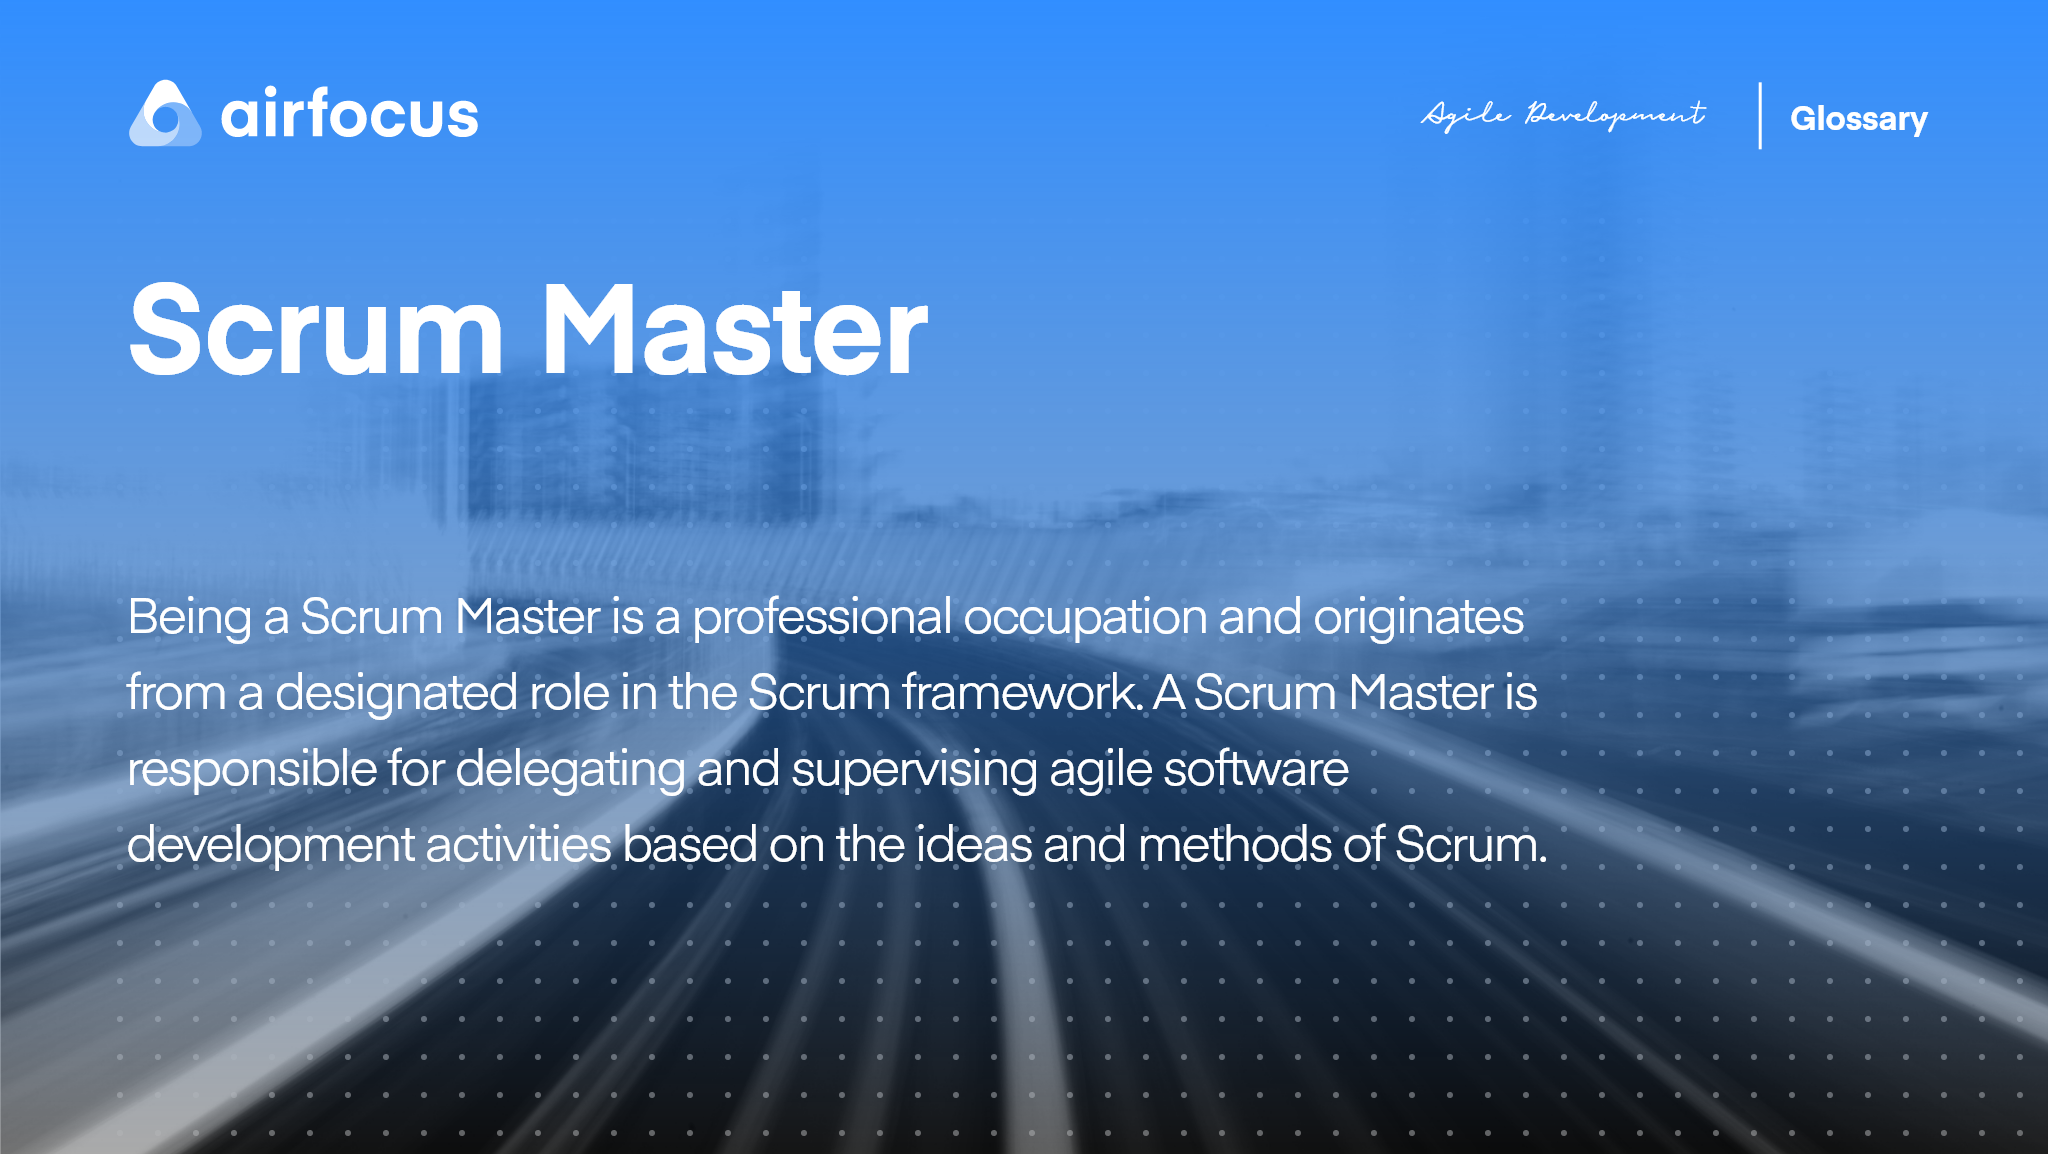 scrum master meaning